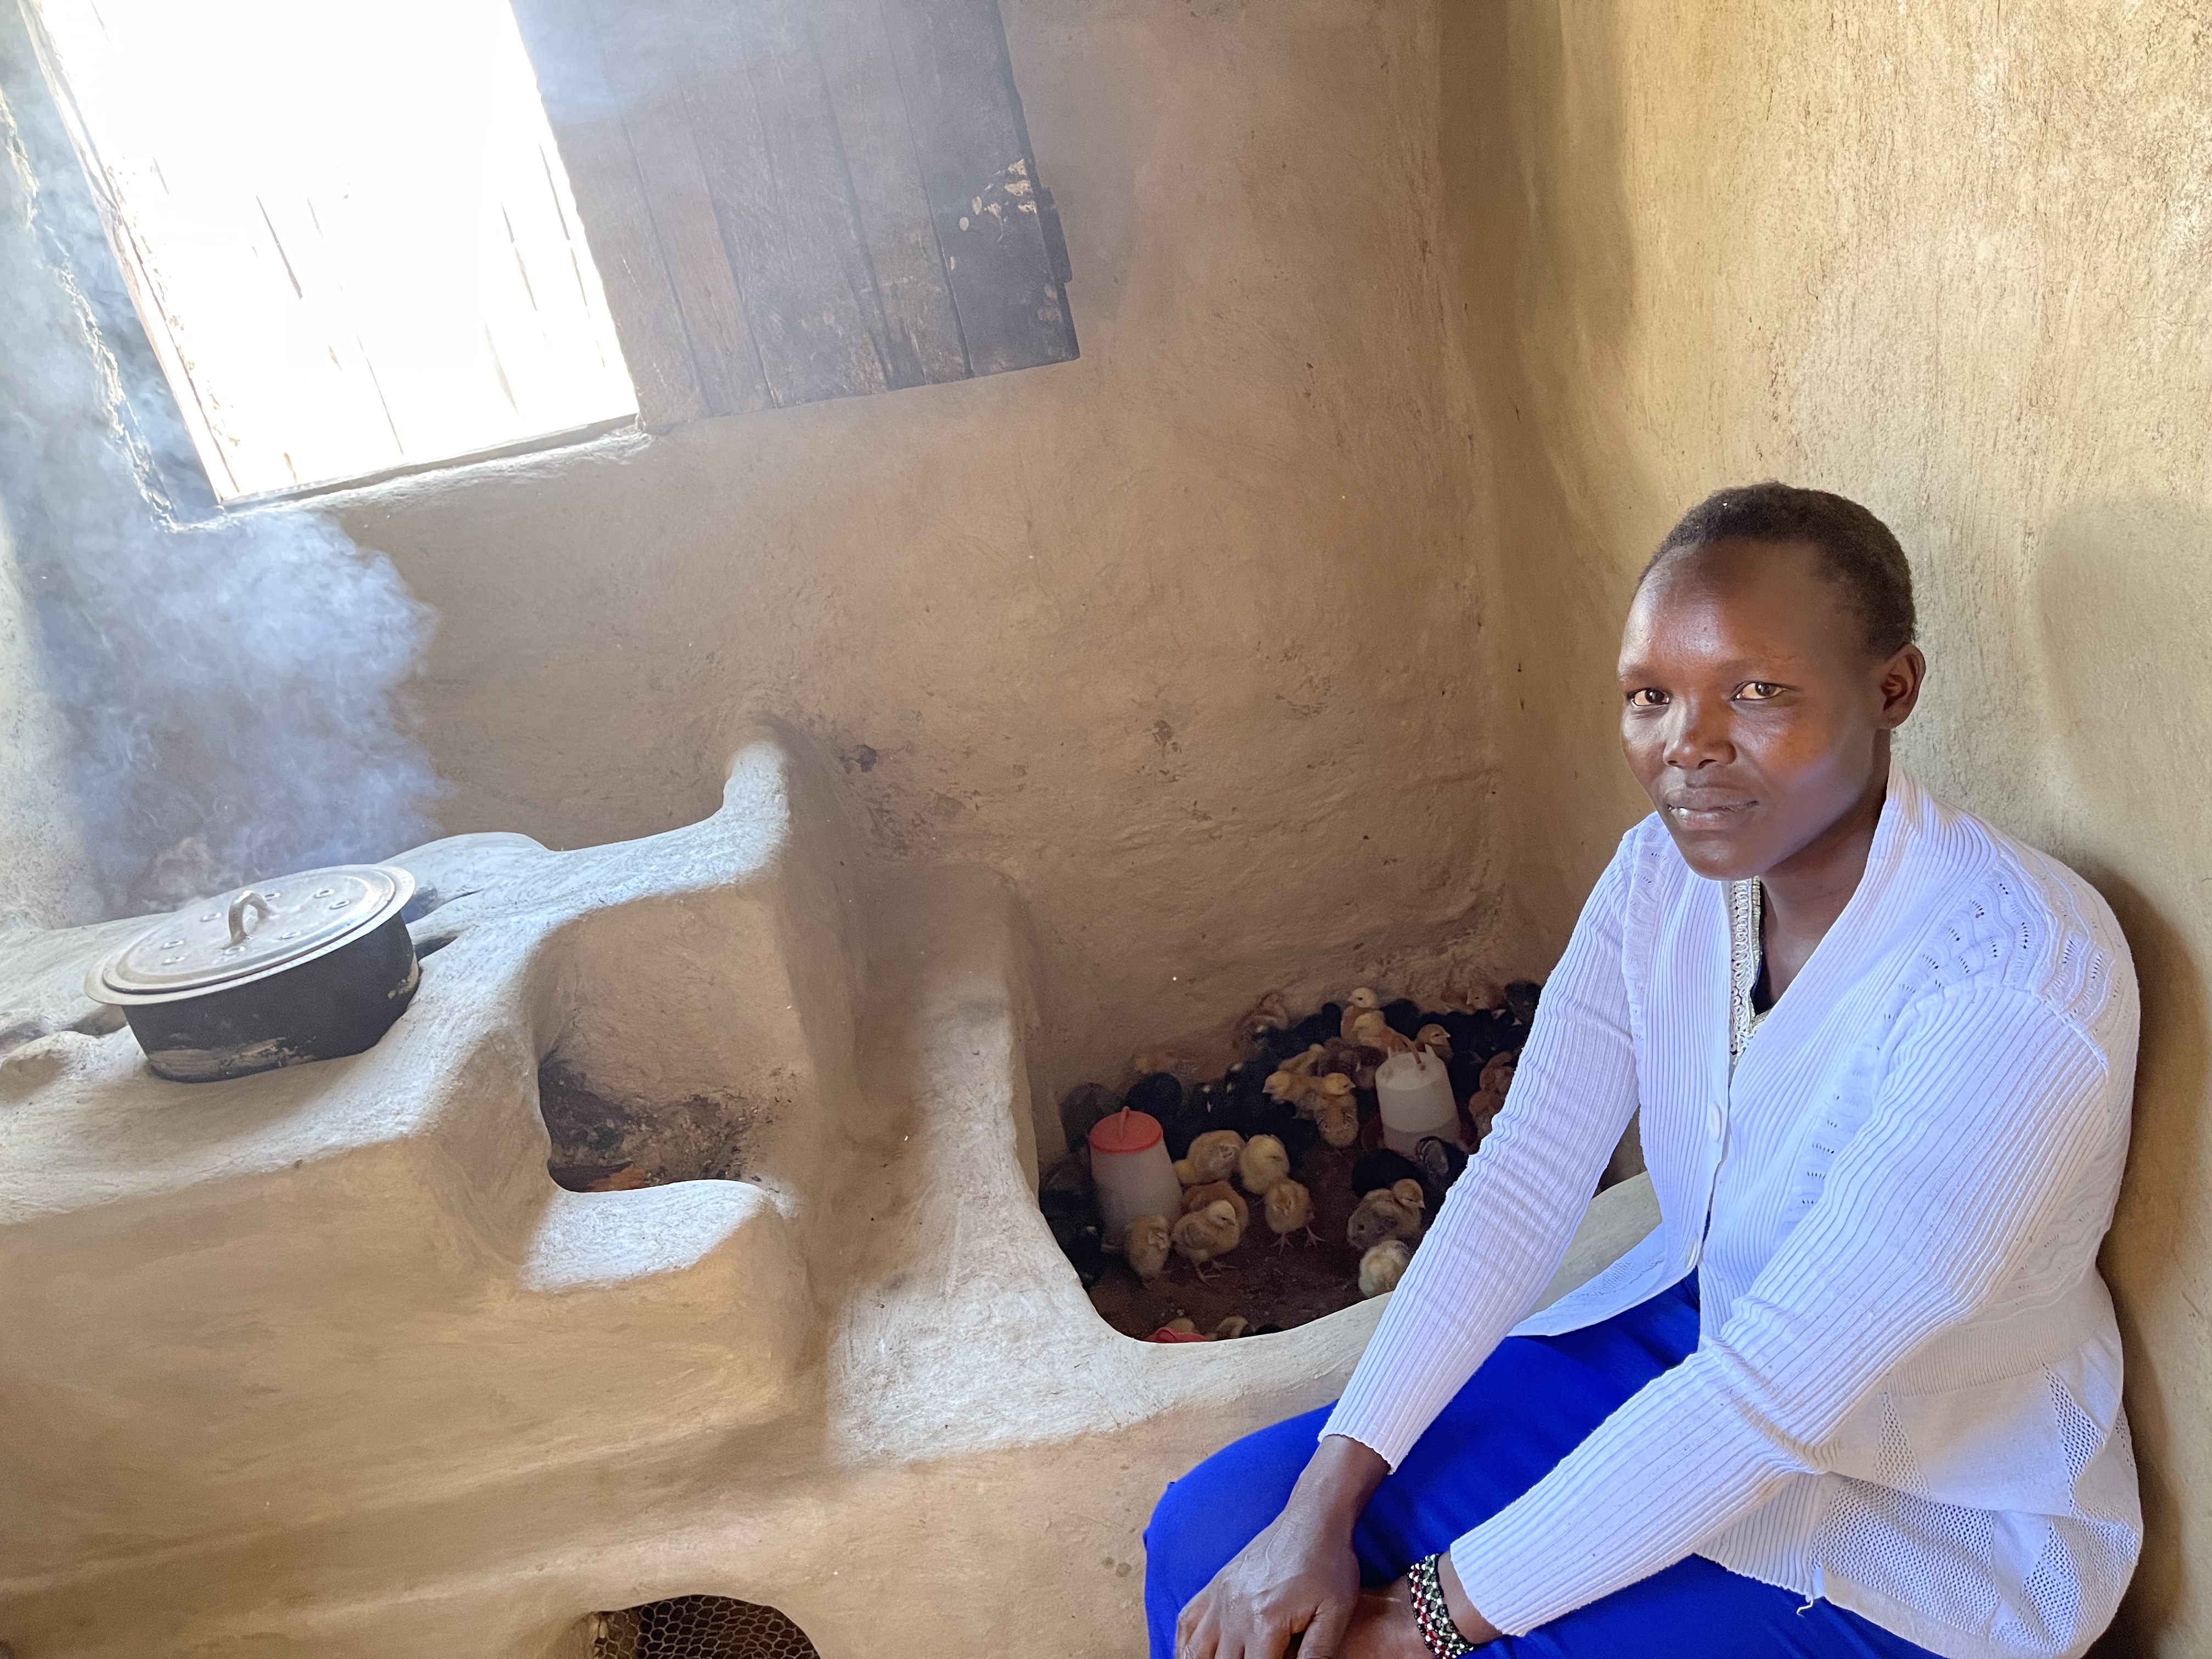 Beatrice Cheptoo buys one day old chicks and is planning to sell them after a month. Photo credit: UN Women/Tabitha Icuga